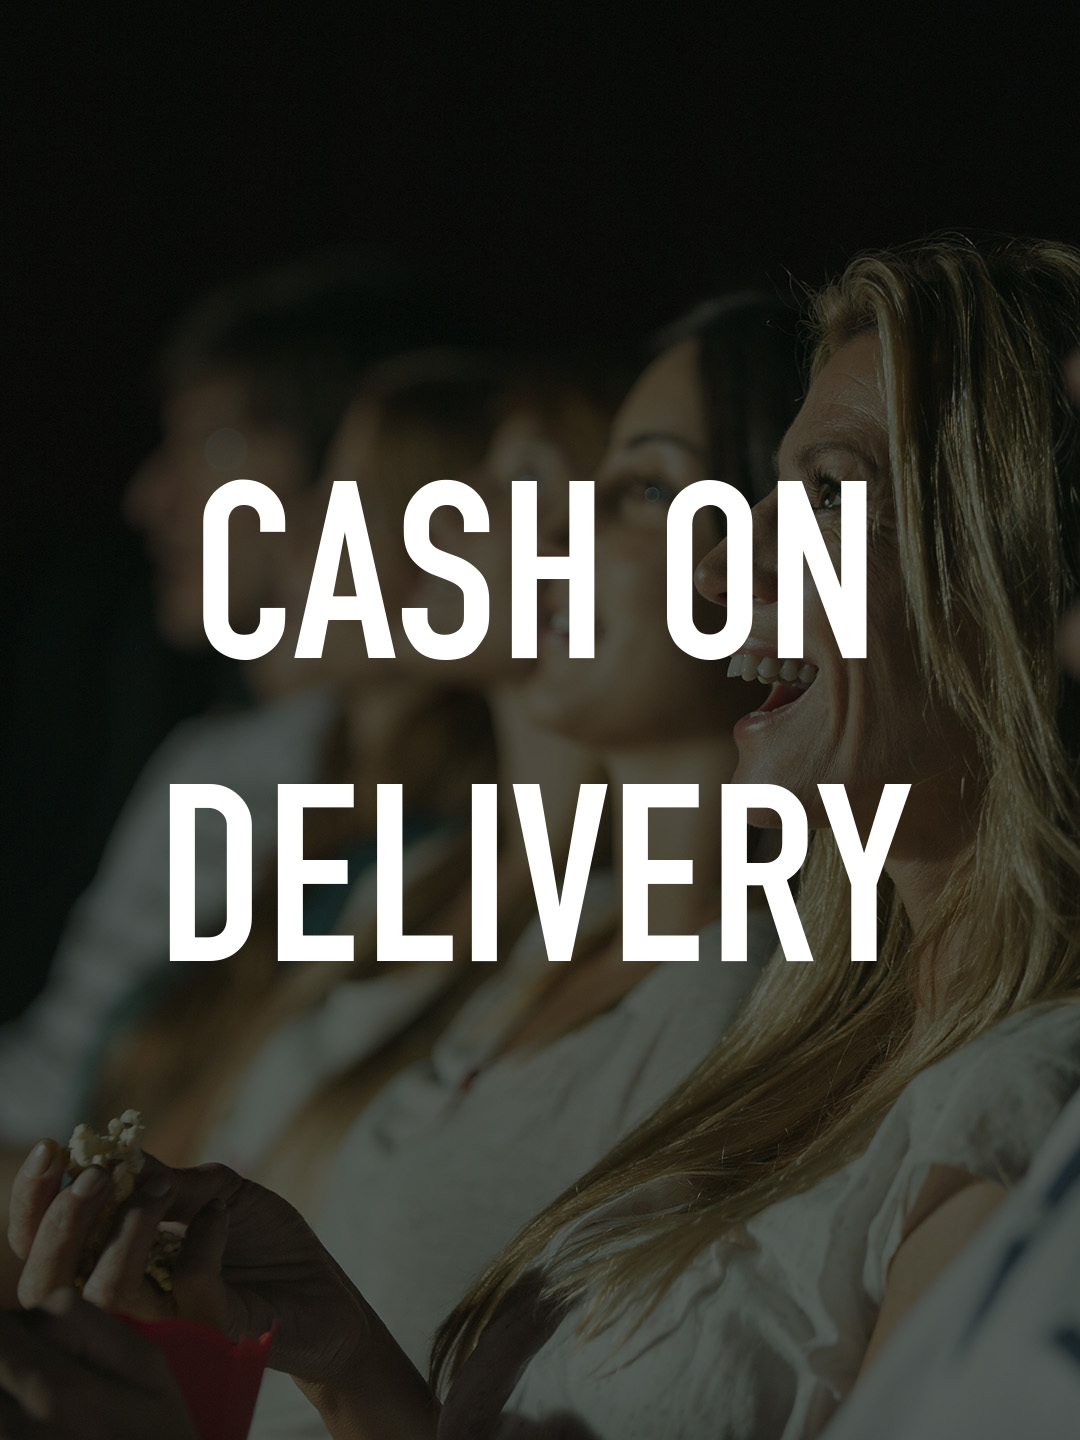 Cash On Delivery Images HD Pictures For Free Vectors Download  Lovepikcom